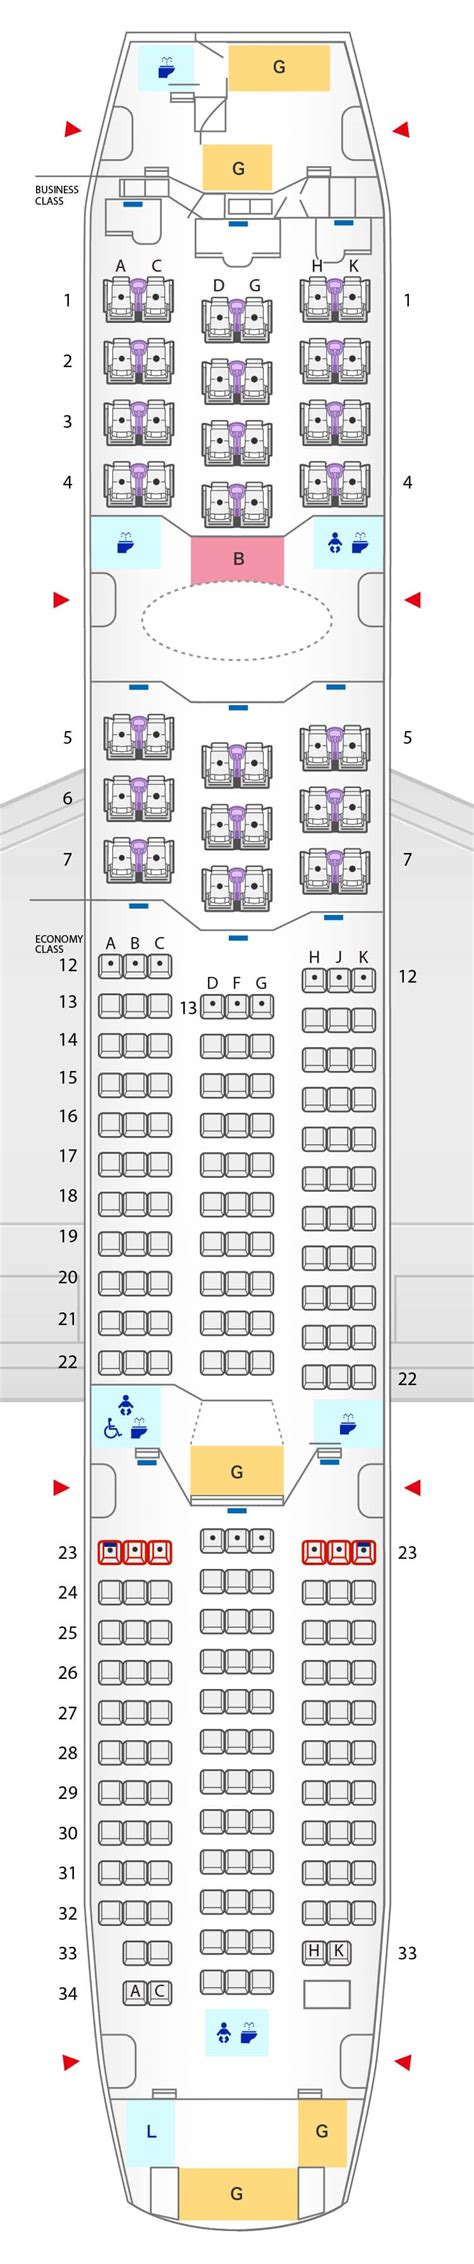 Training and Certification Options for MAP Boeing 787 8 Seat Map